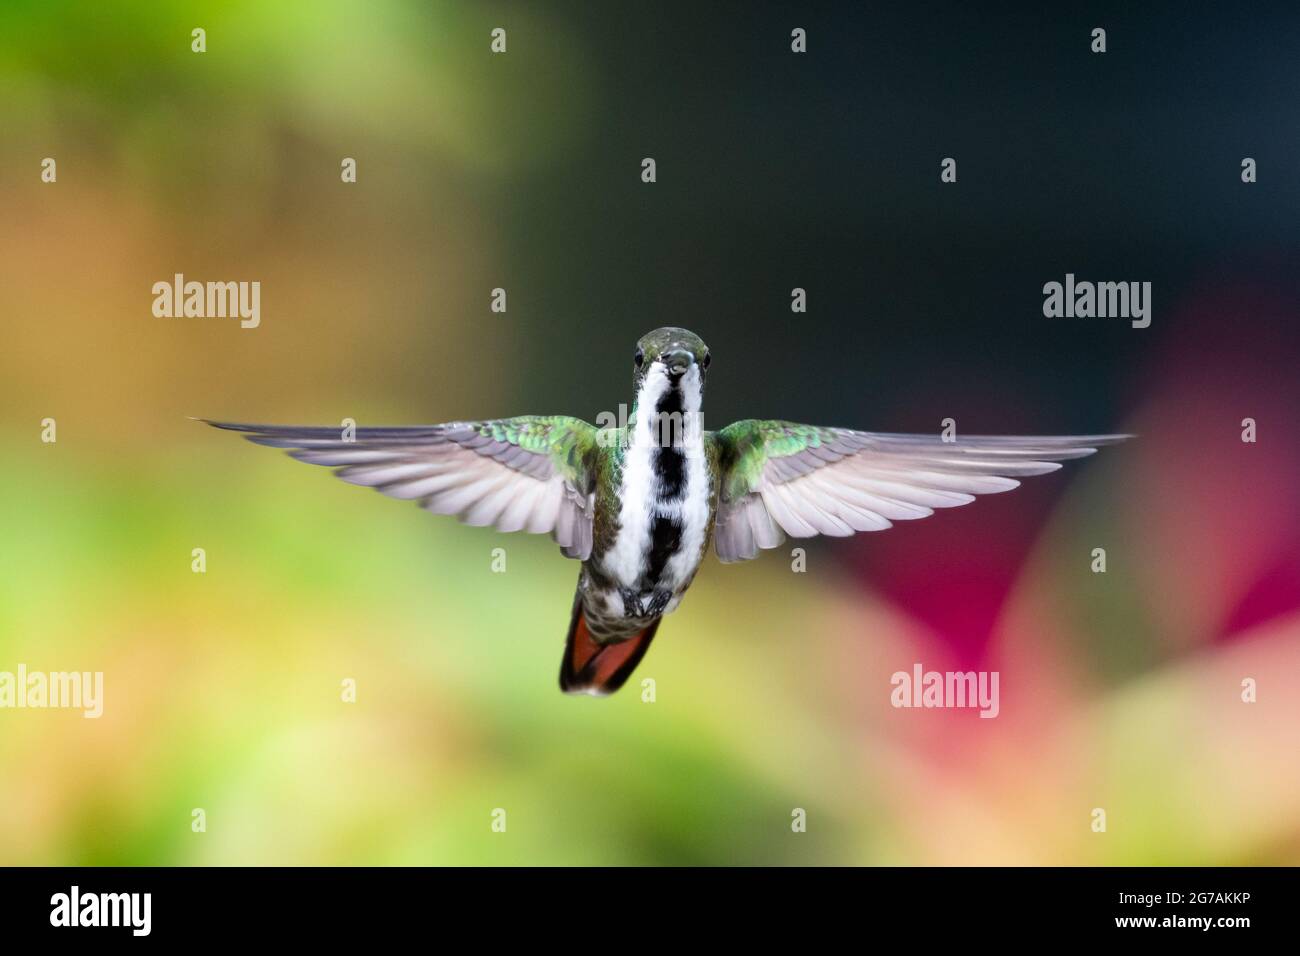 A female Black-throated Mango hummingbird (anthracothorax nigricollis) hovering with wings spread looking at camera with a colorful background. Stock Photo